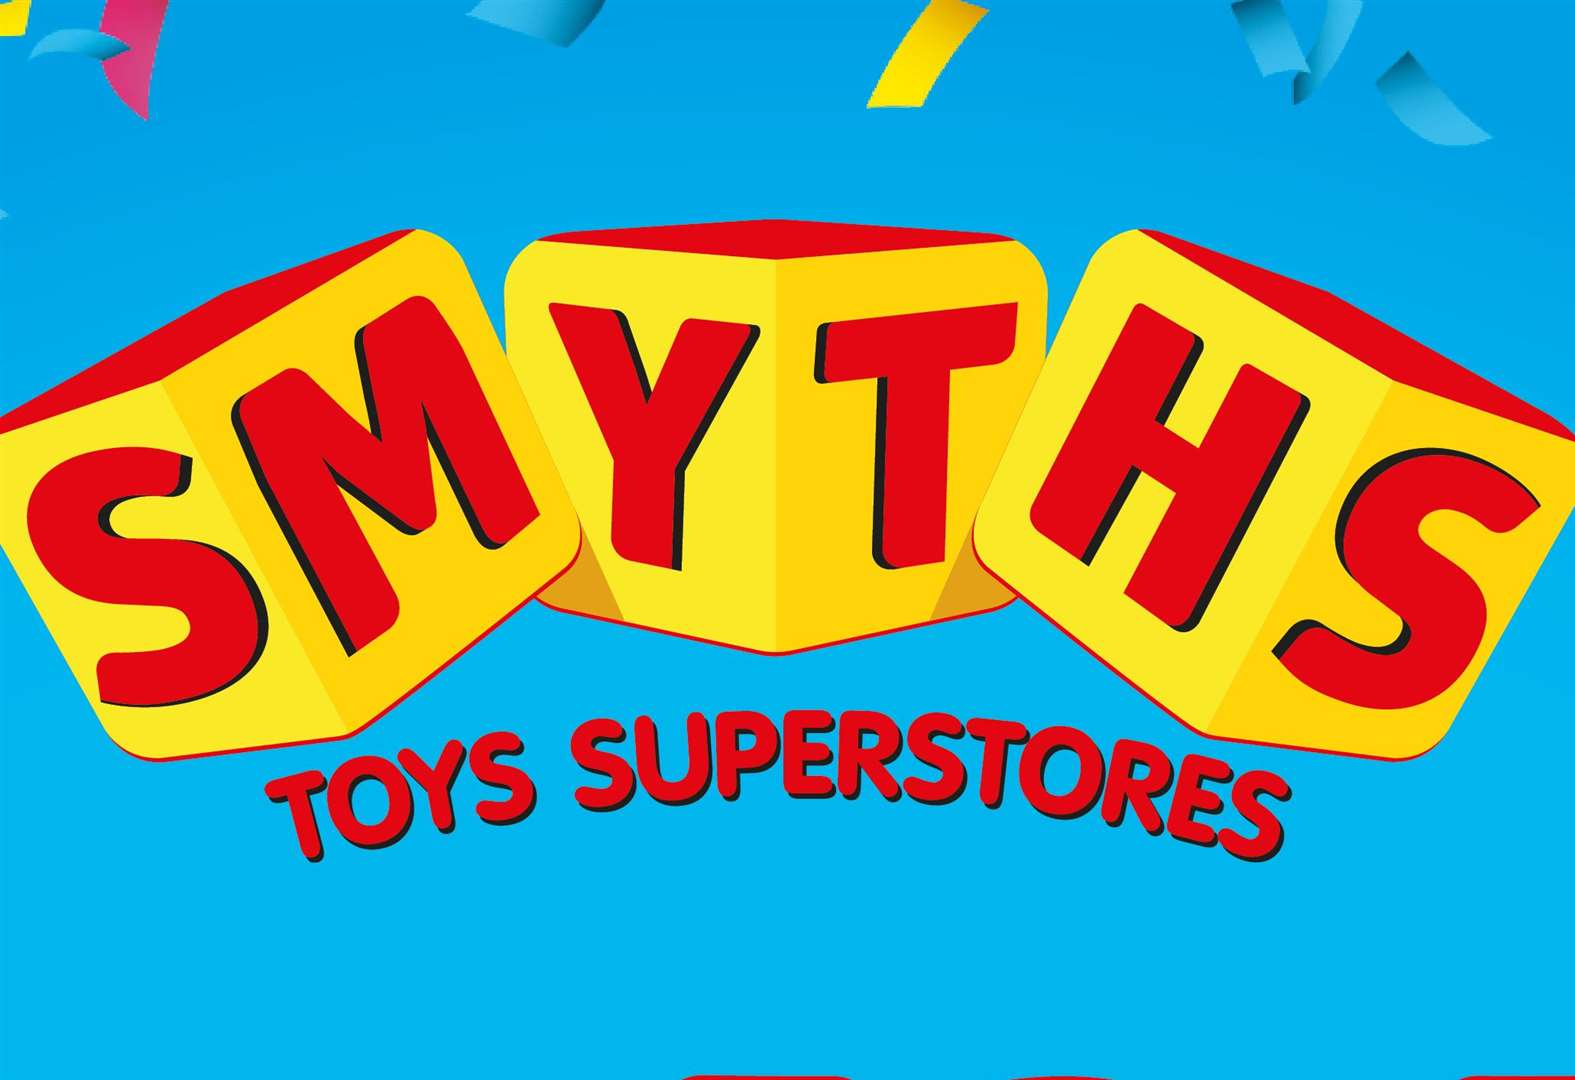 smyths-toys-superstore-will-open-new-gillingham-store-on-friday-april-19